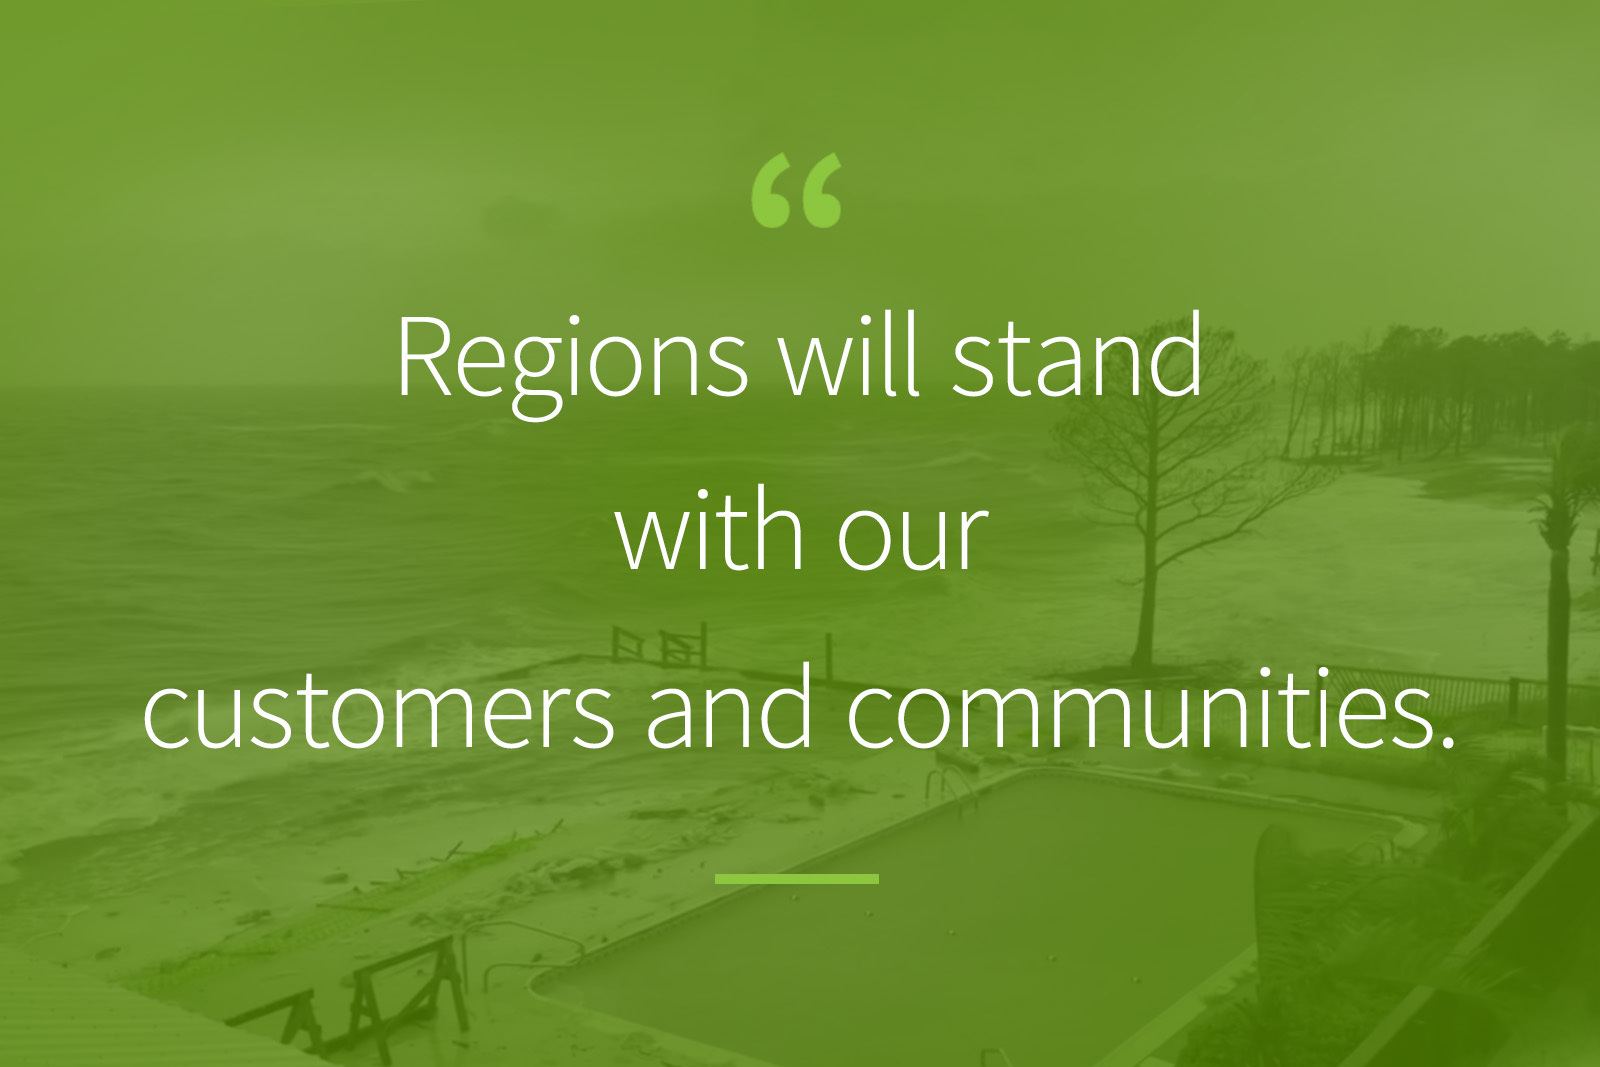 Regions will stand with our customers and communities.